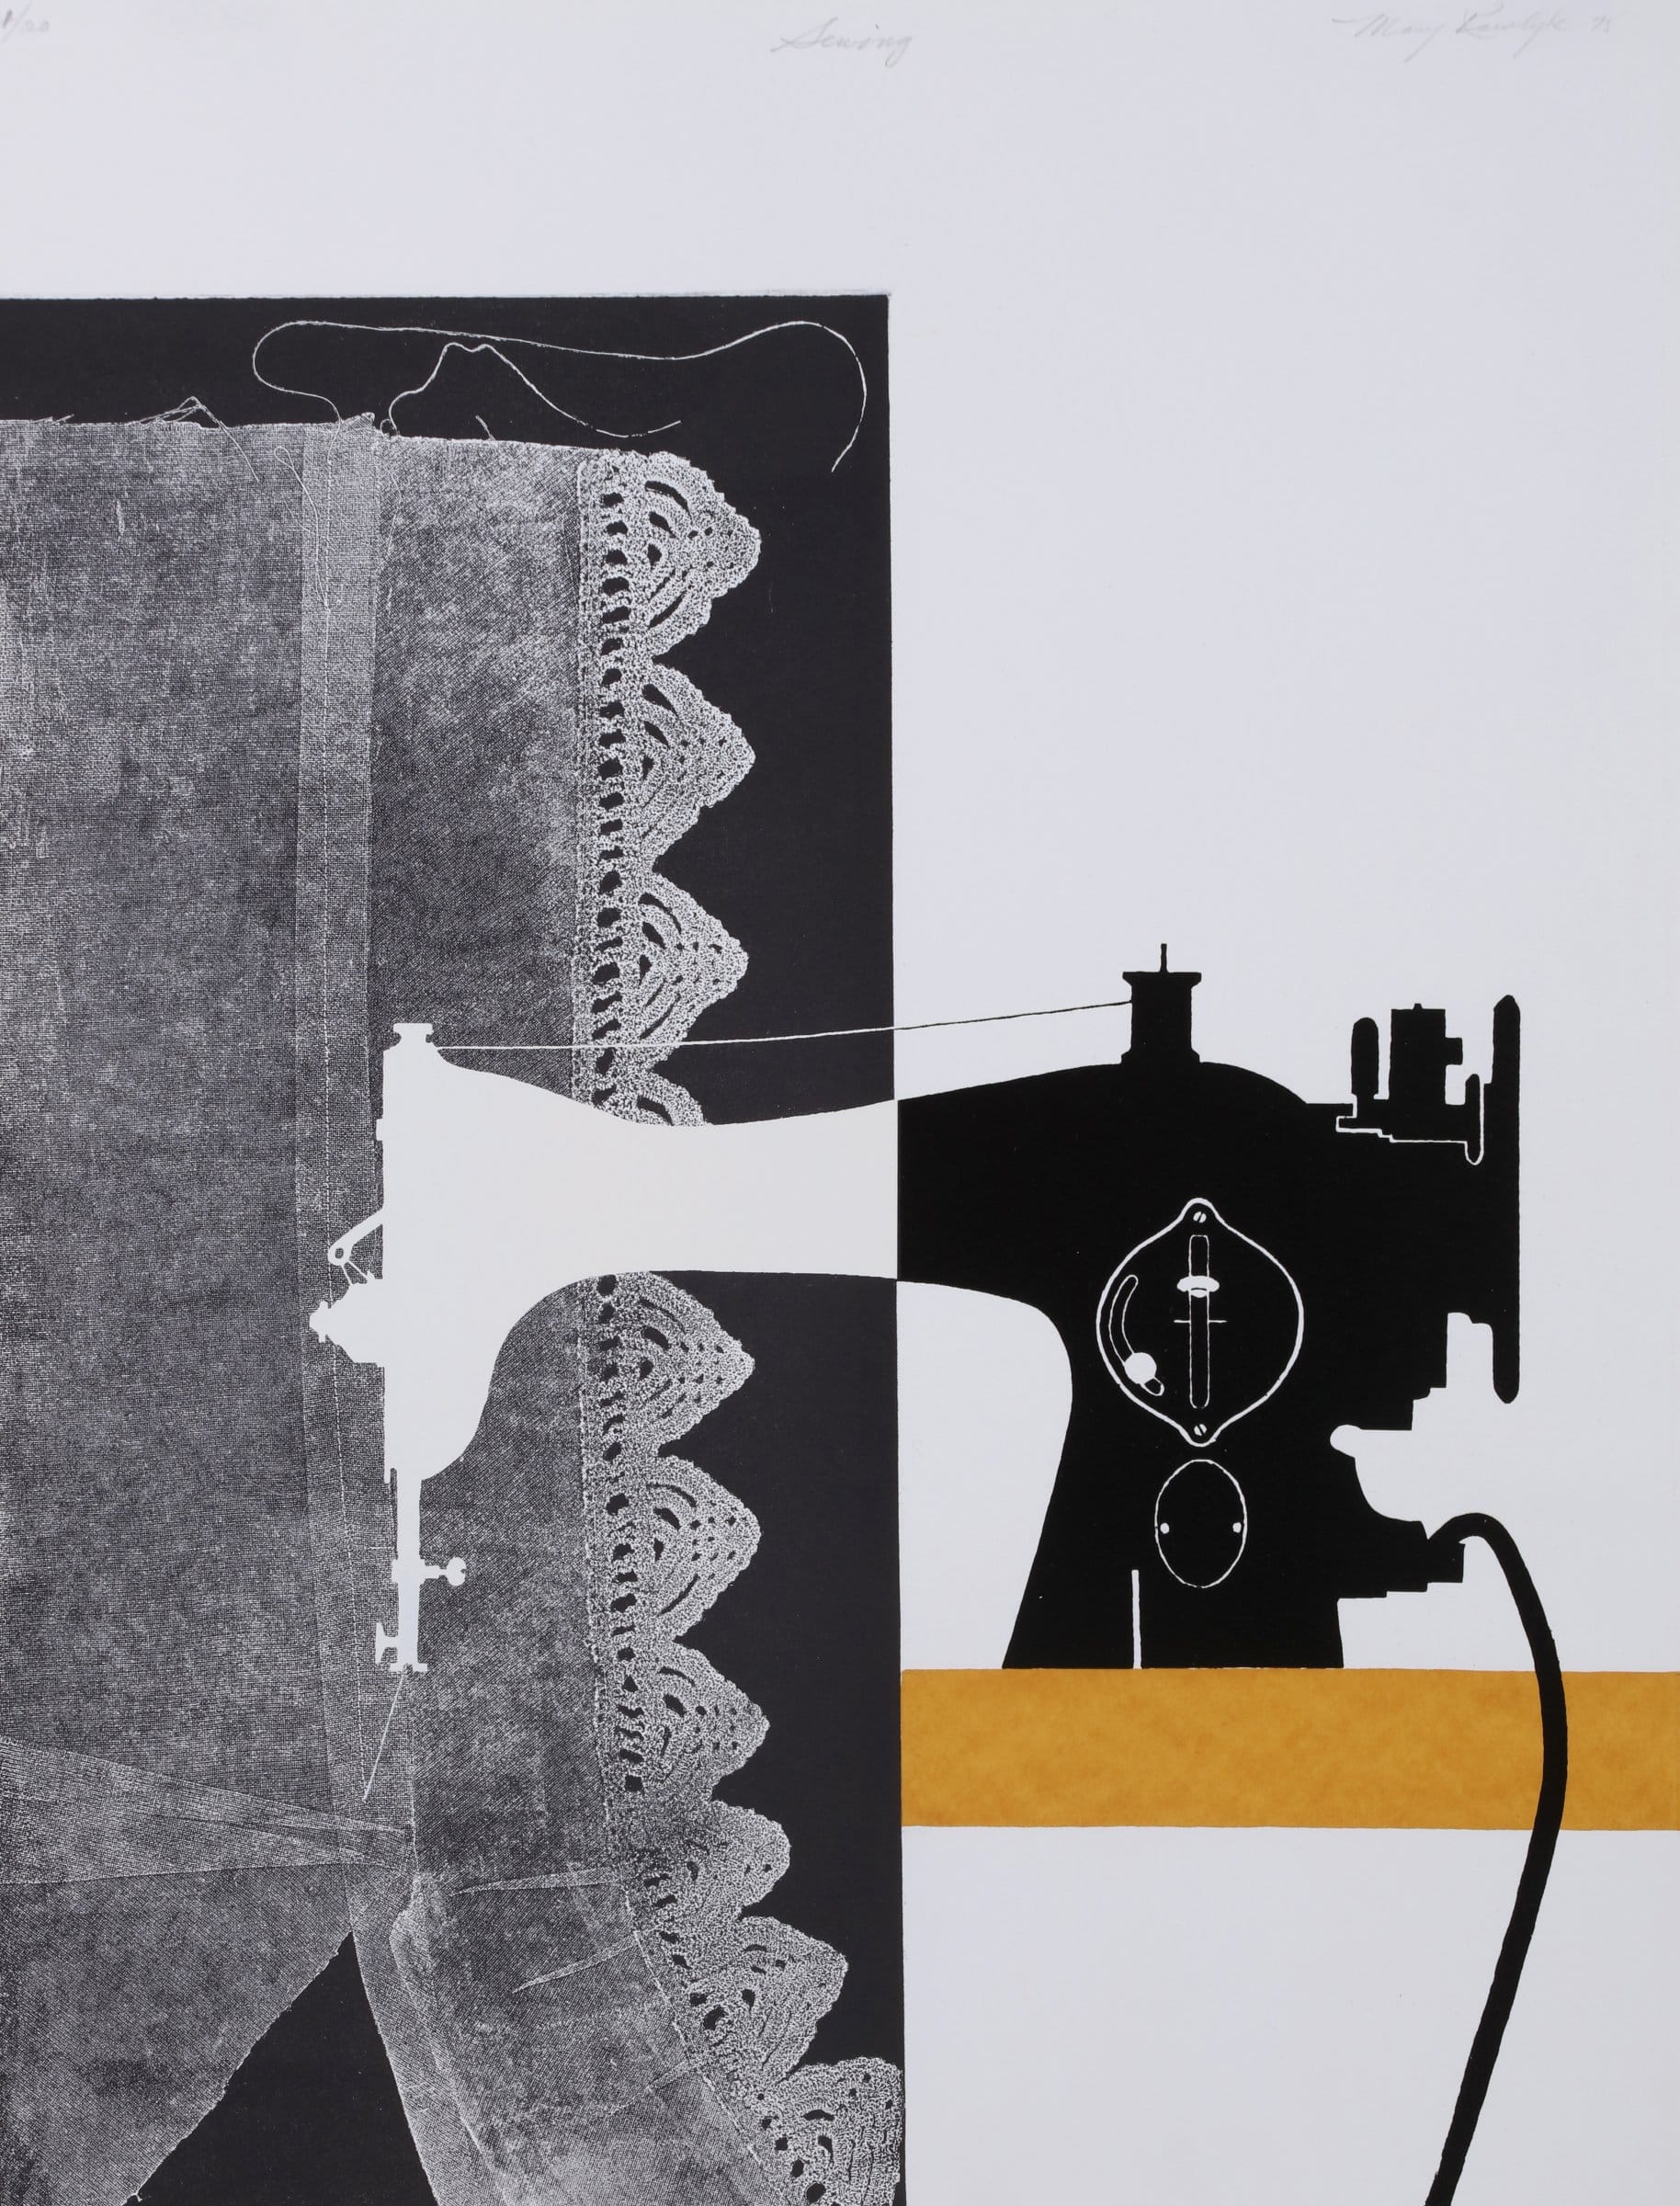 Image: Mary Rawlyk, Sewing, 1975, etching and serigraph on paper, 1/20. Gift of Mary Rawlyk in memory of Natalie Luckyj, 2002 (45-023.19) Photo: Bernard Clark